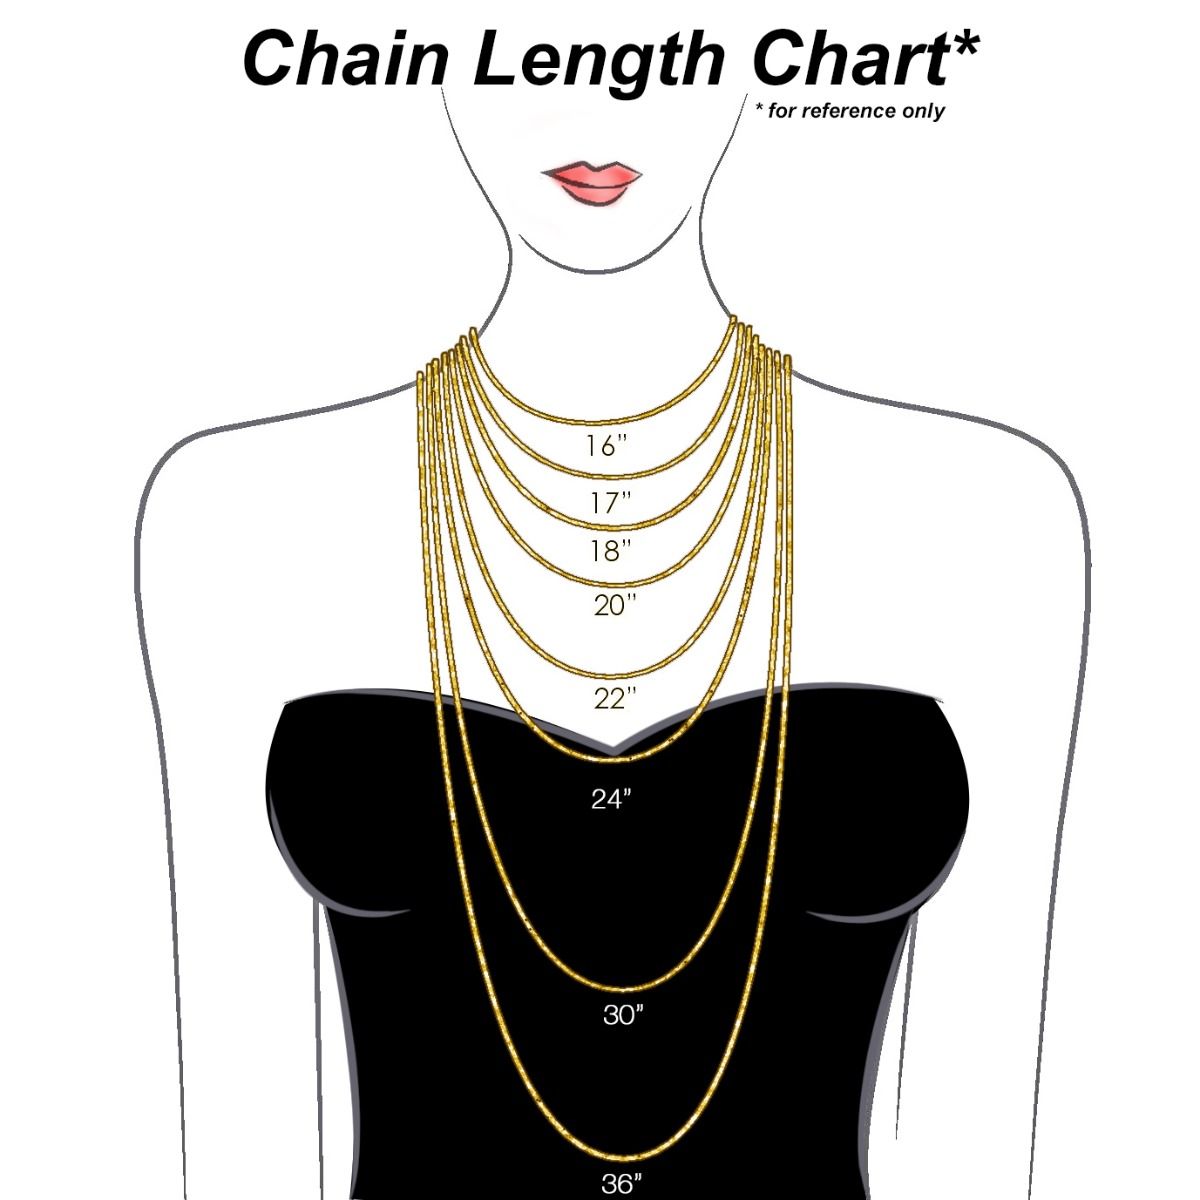 14KT Gold 2.75MM Diamond Cut Rope Chain - 4 Lengths Available 16 Inches / White,16 Inches / Yellow,18 Inches / White,18 Inches / Yellow,20 Inches / White,20 Inches / Yellow,24 Inches / White,24 Inches / Yellow